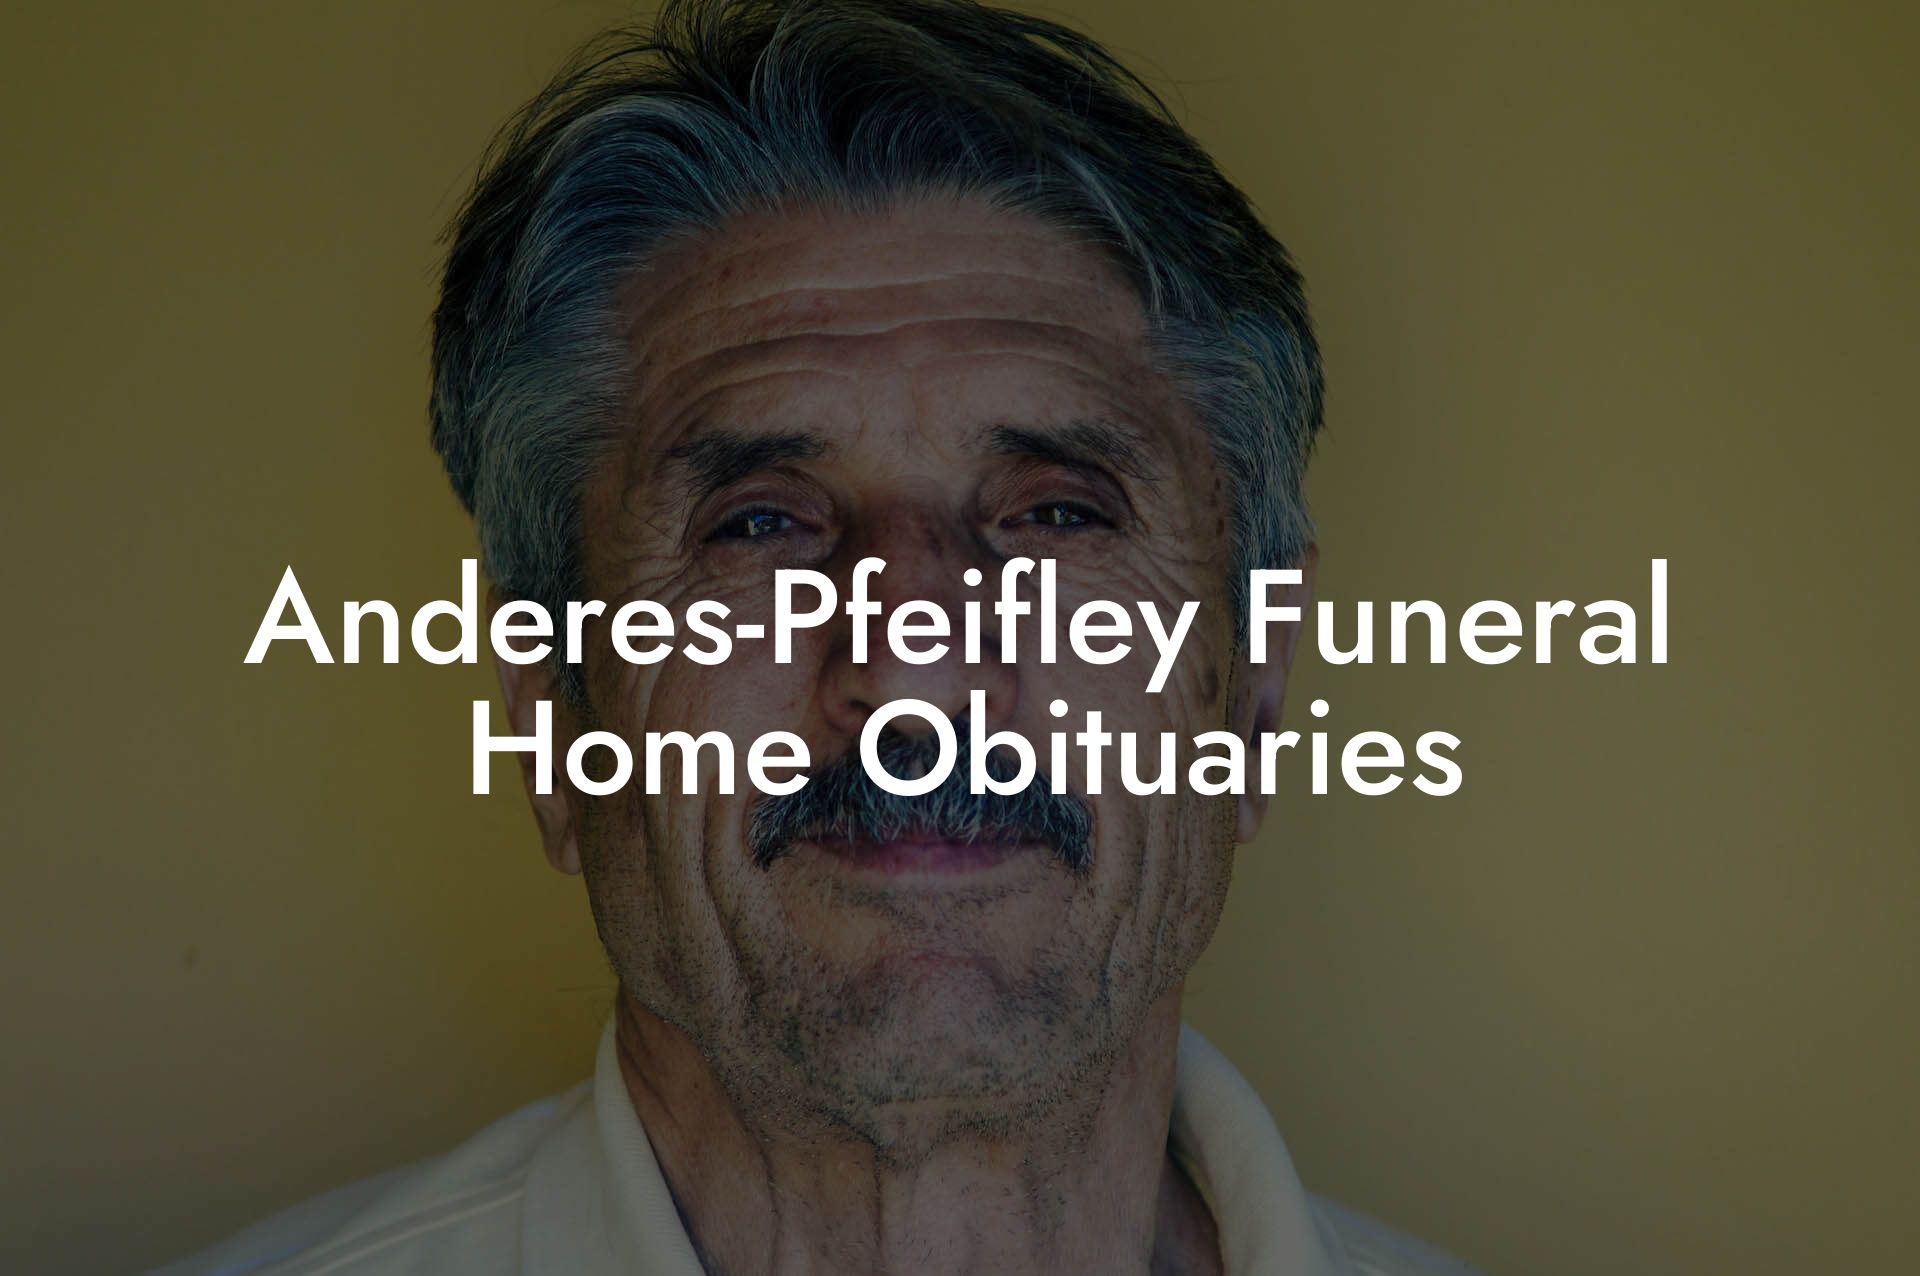 Anderes-Pfeifley Funeral Home Obituaries